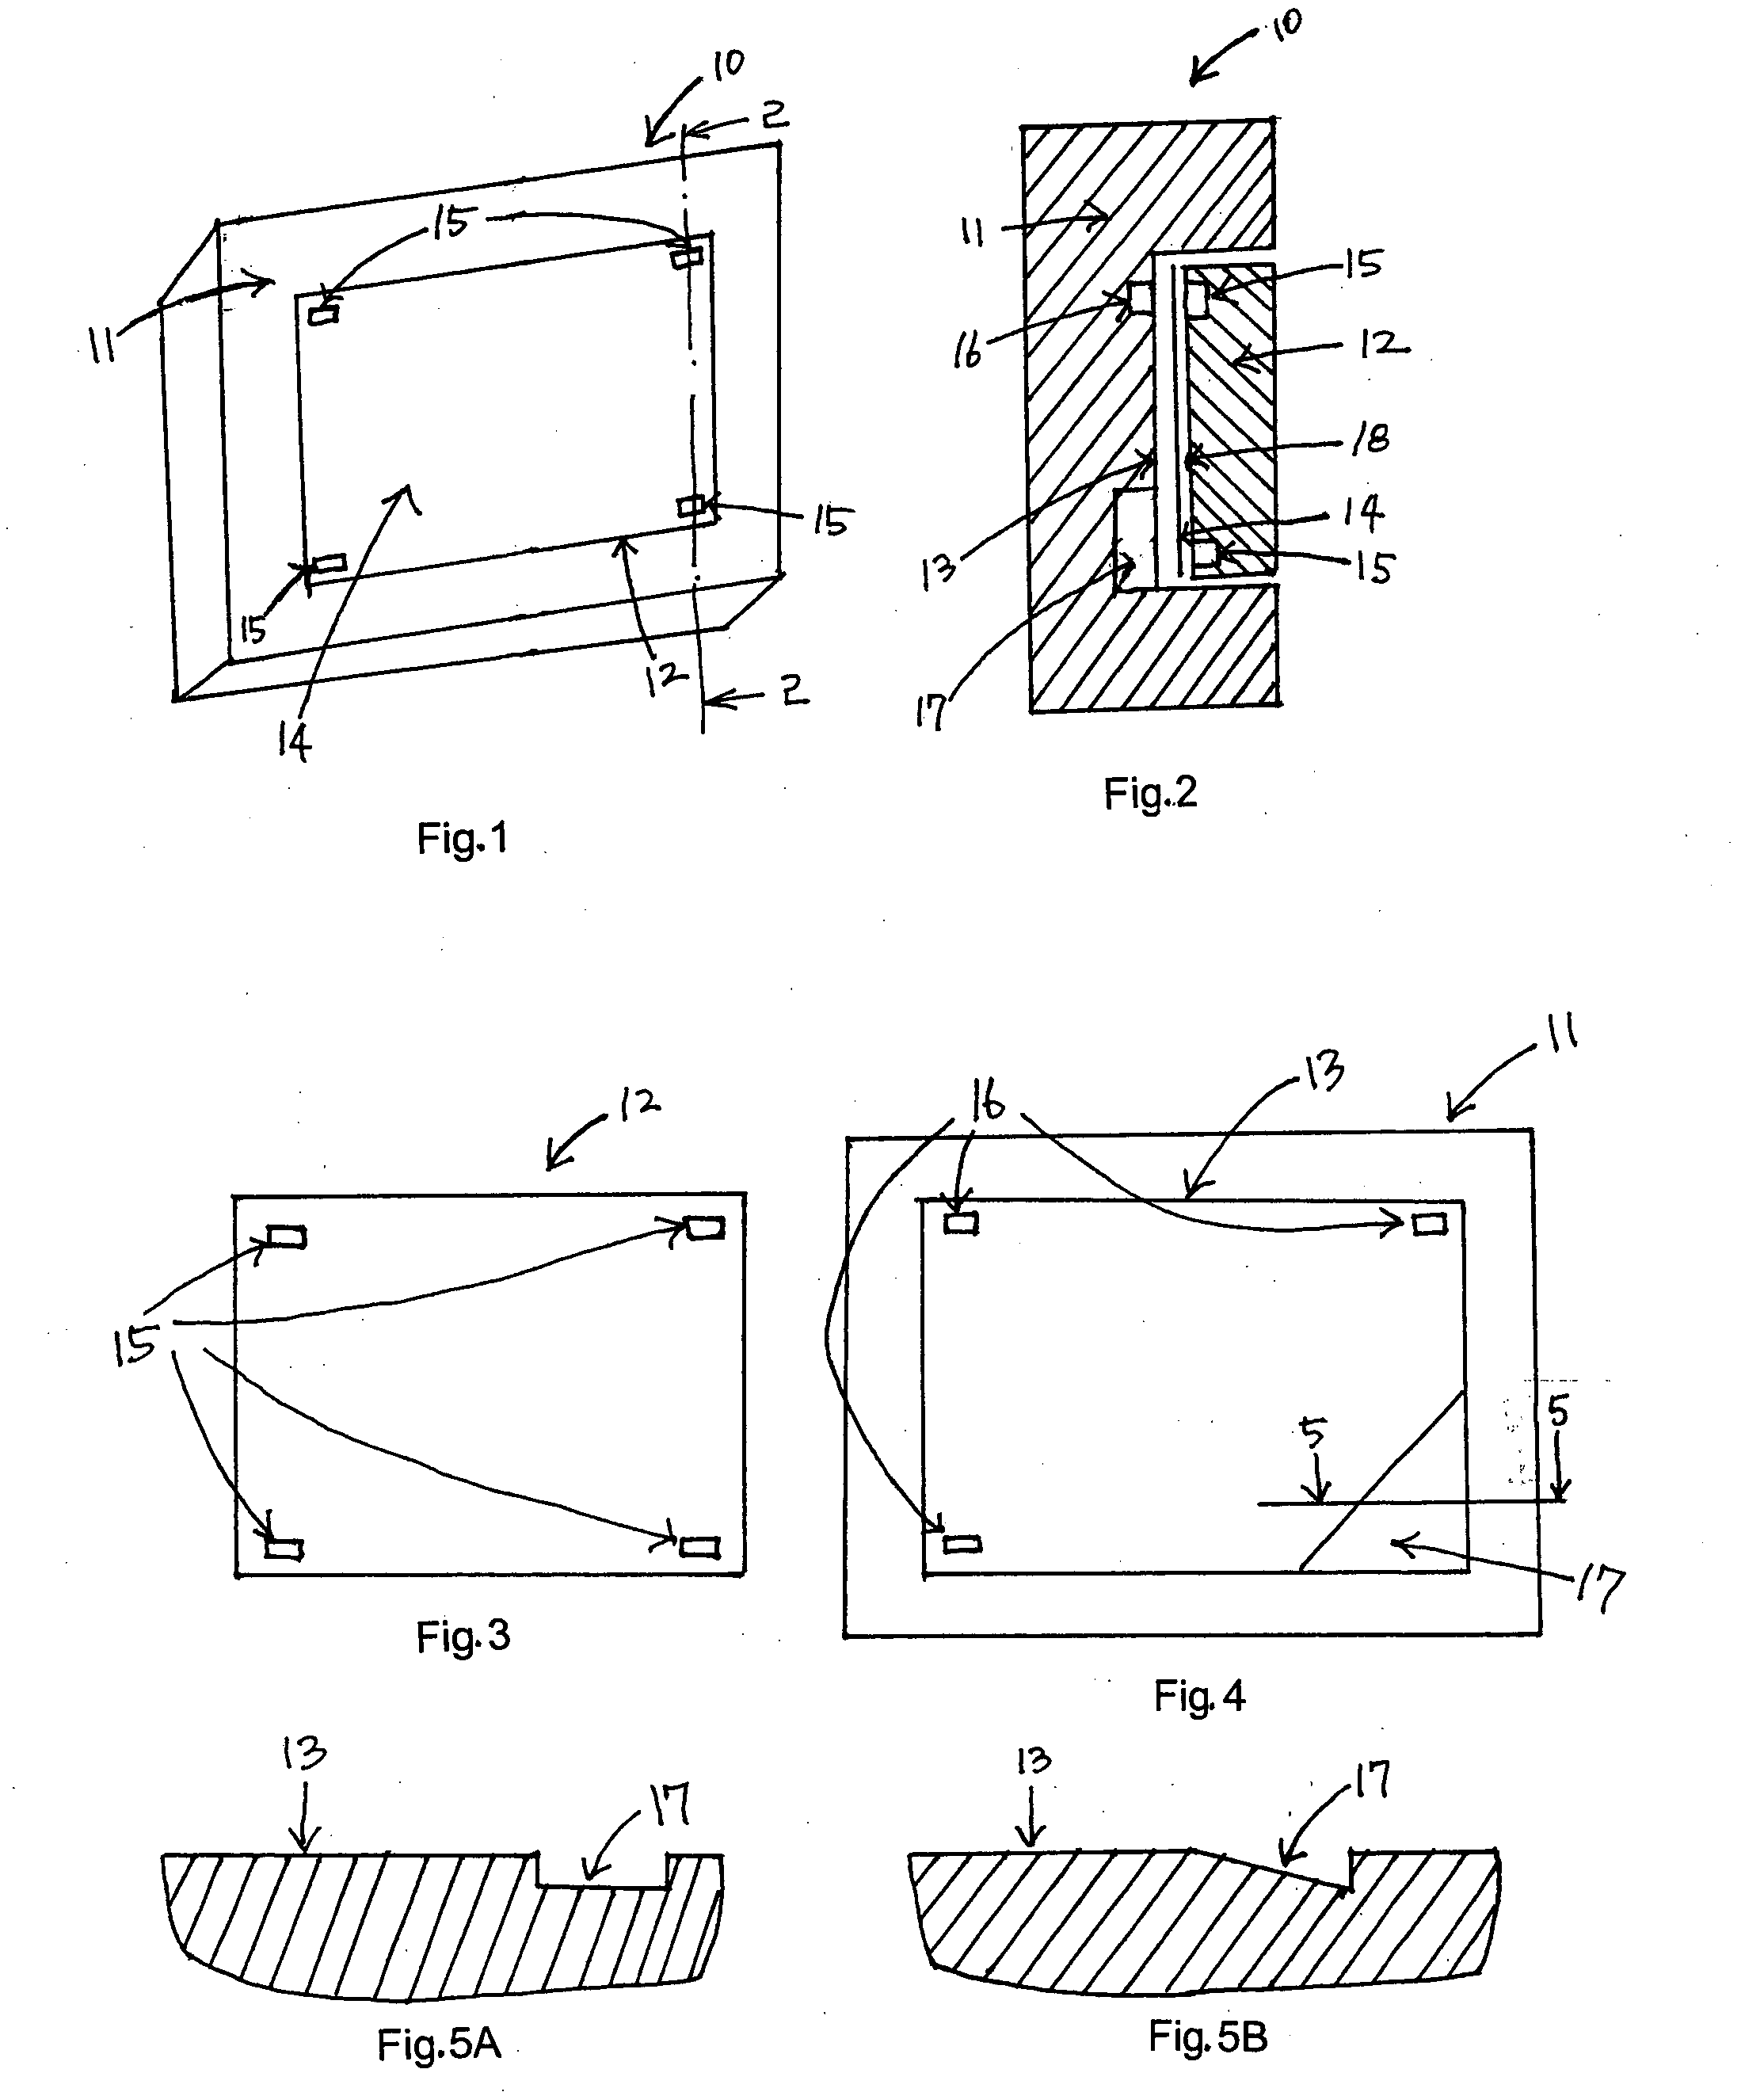 Picture holding system